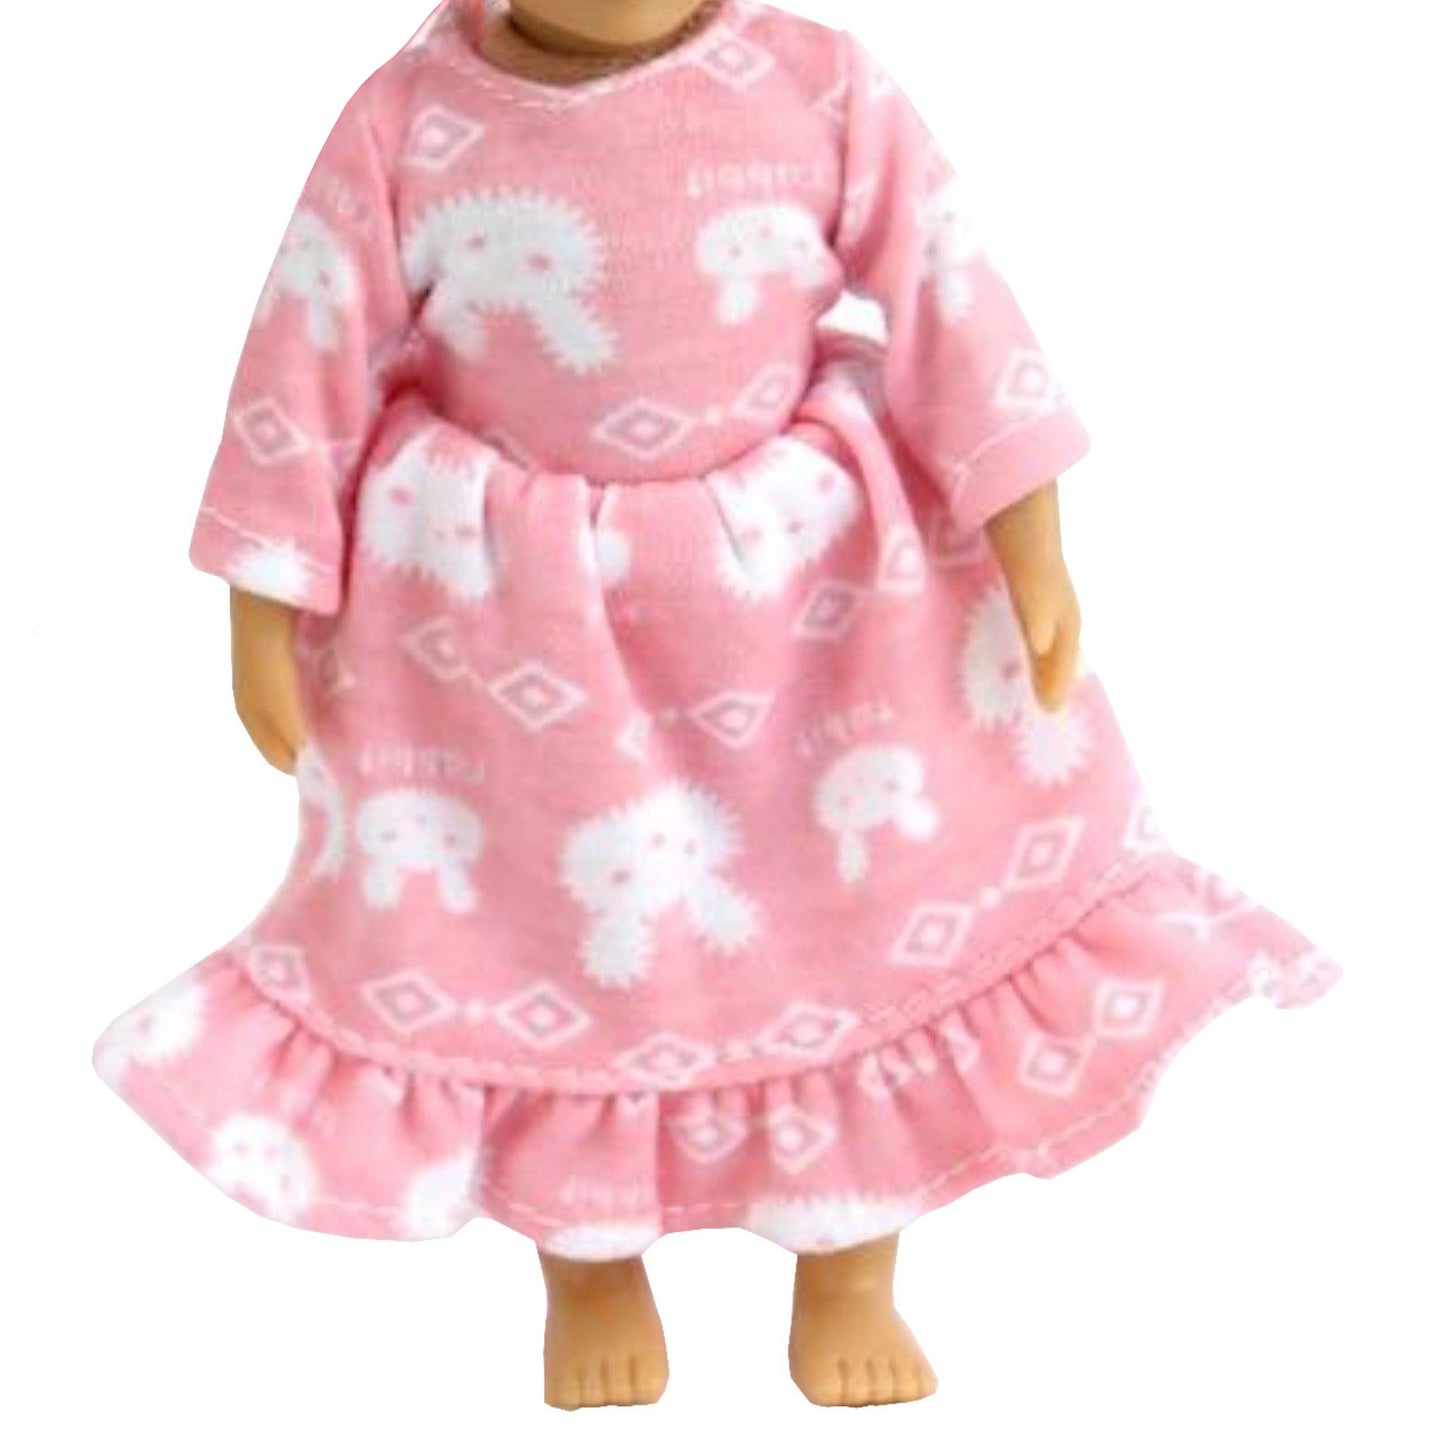 Pink Bunny Nightgown for 6 1/2-inch dolls with doll